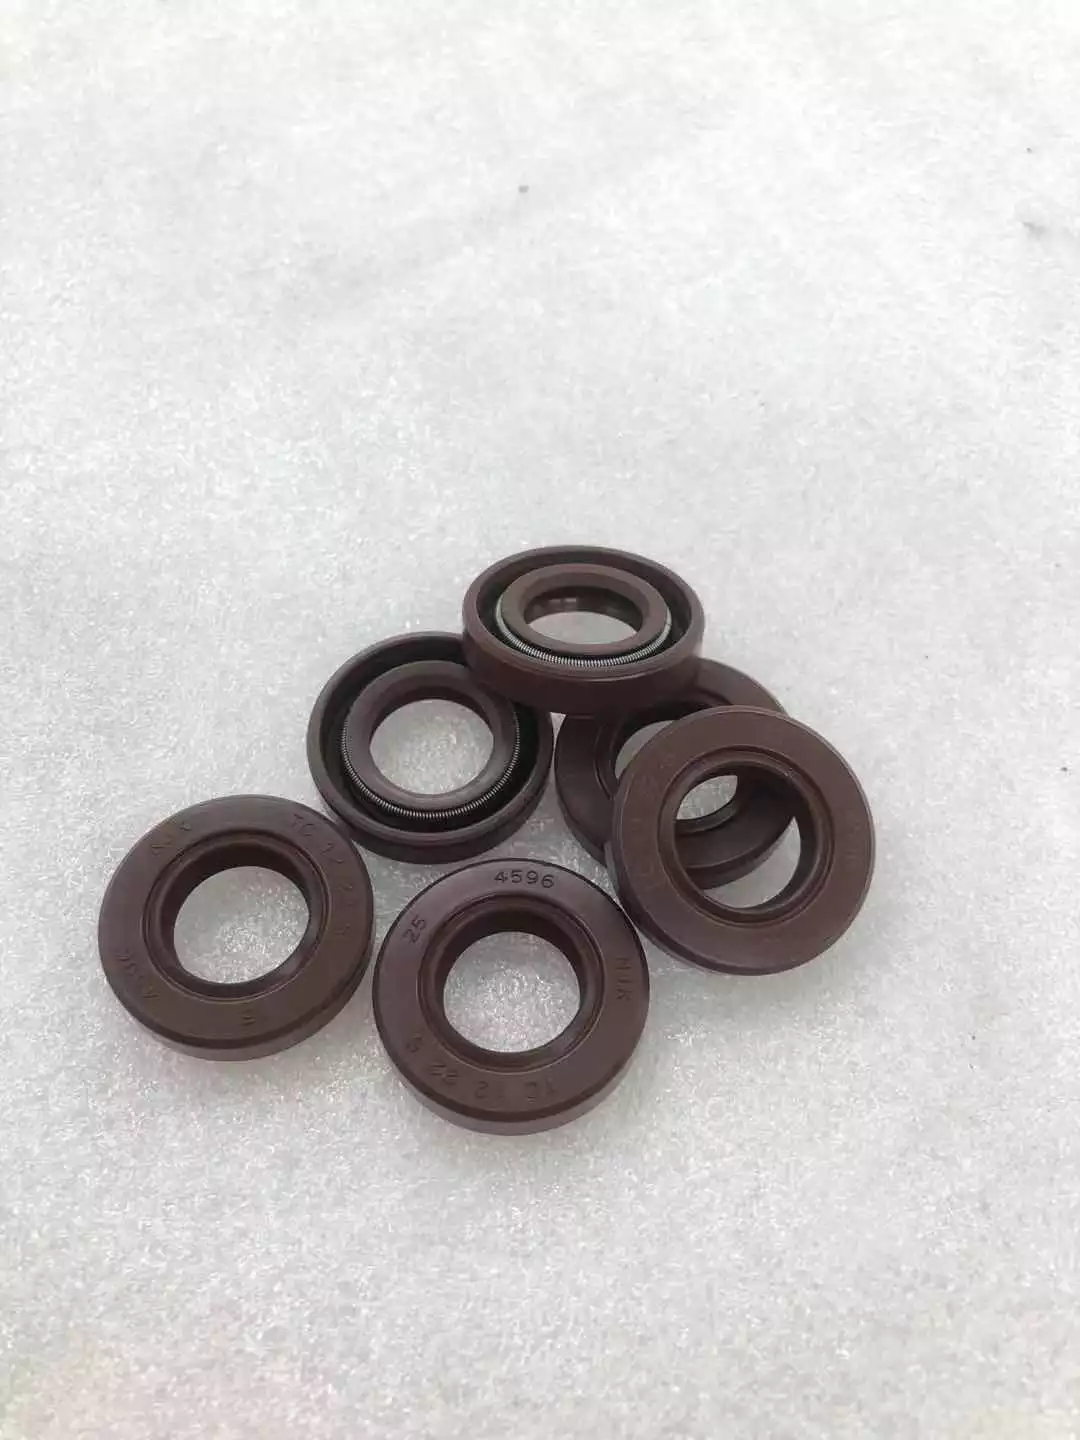 oil seal Hot sale High quality engine parts 125 foot shift arm oil seal Factory supply DAYANG tricycle parts perfect performance